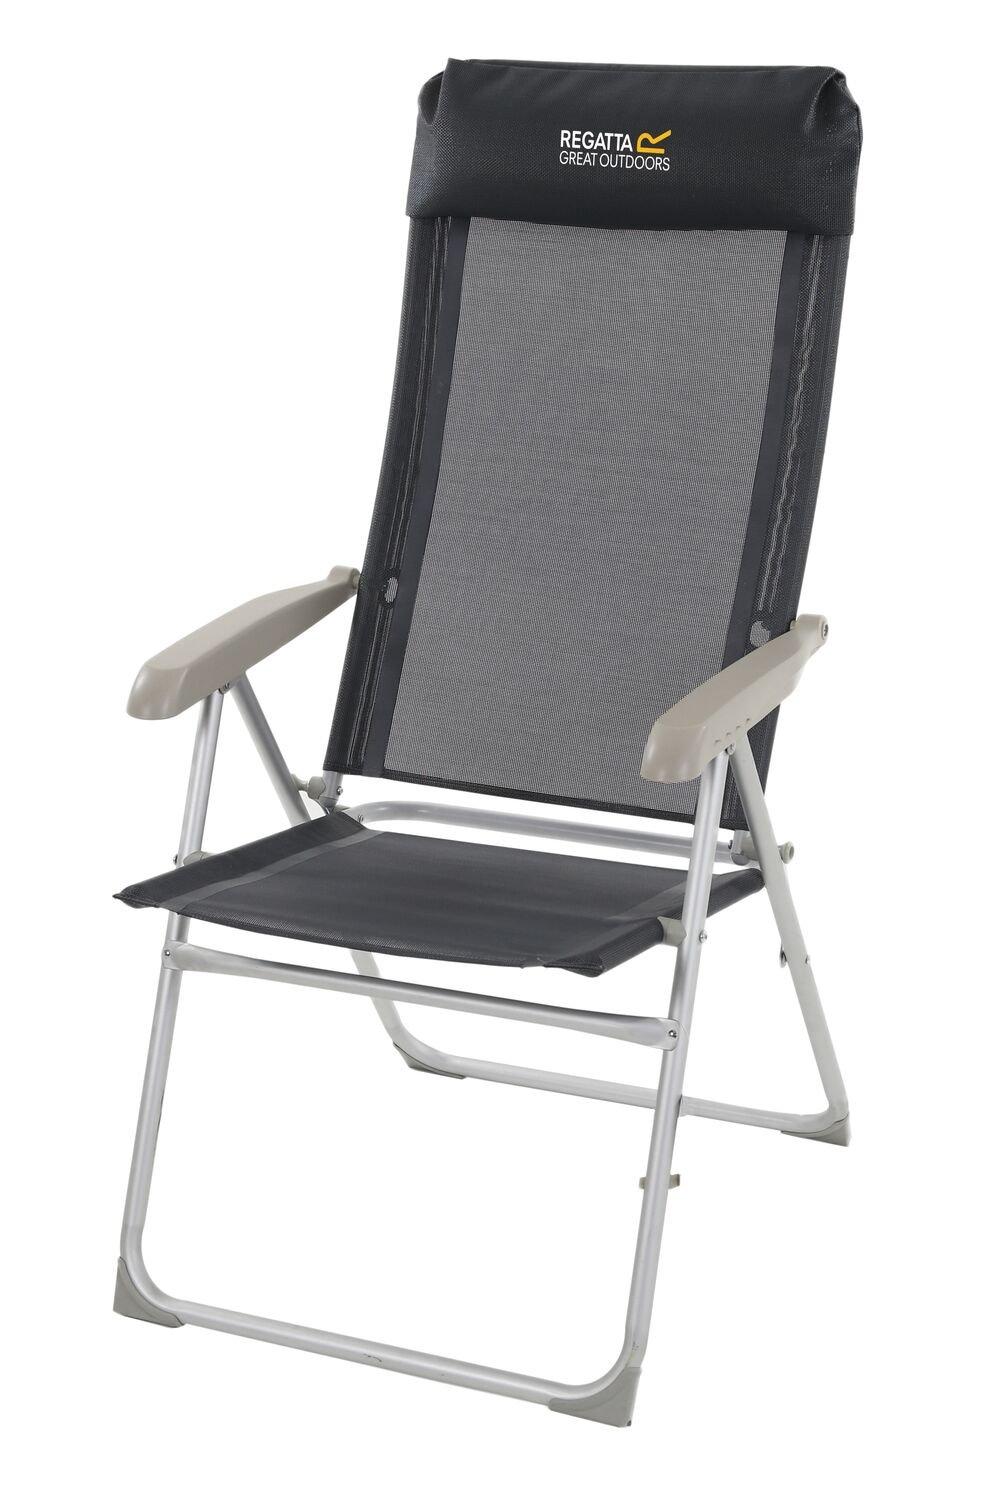 'Colico' Hard Armed Camping Chair